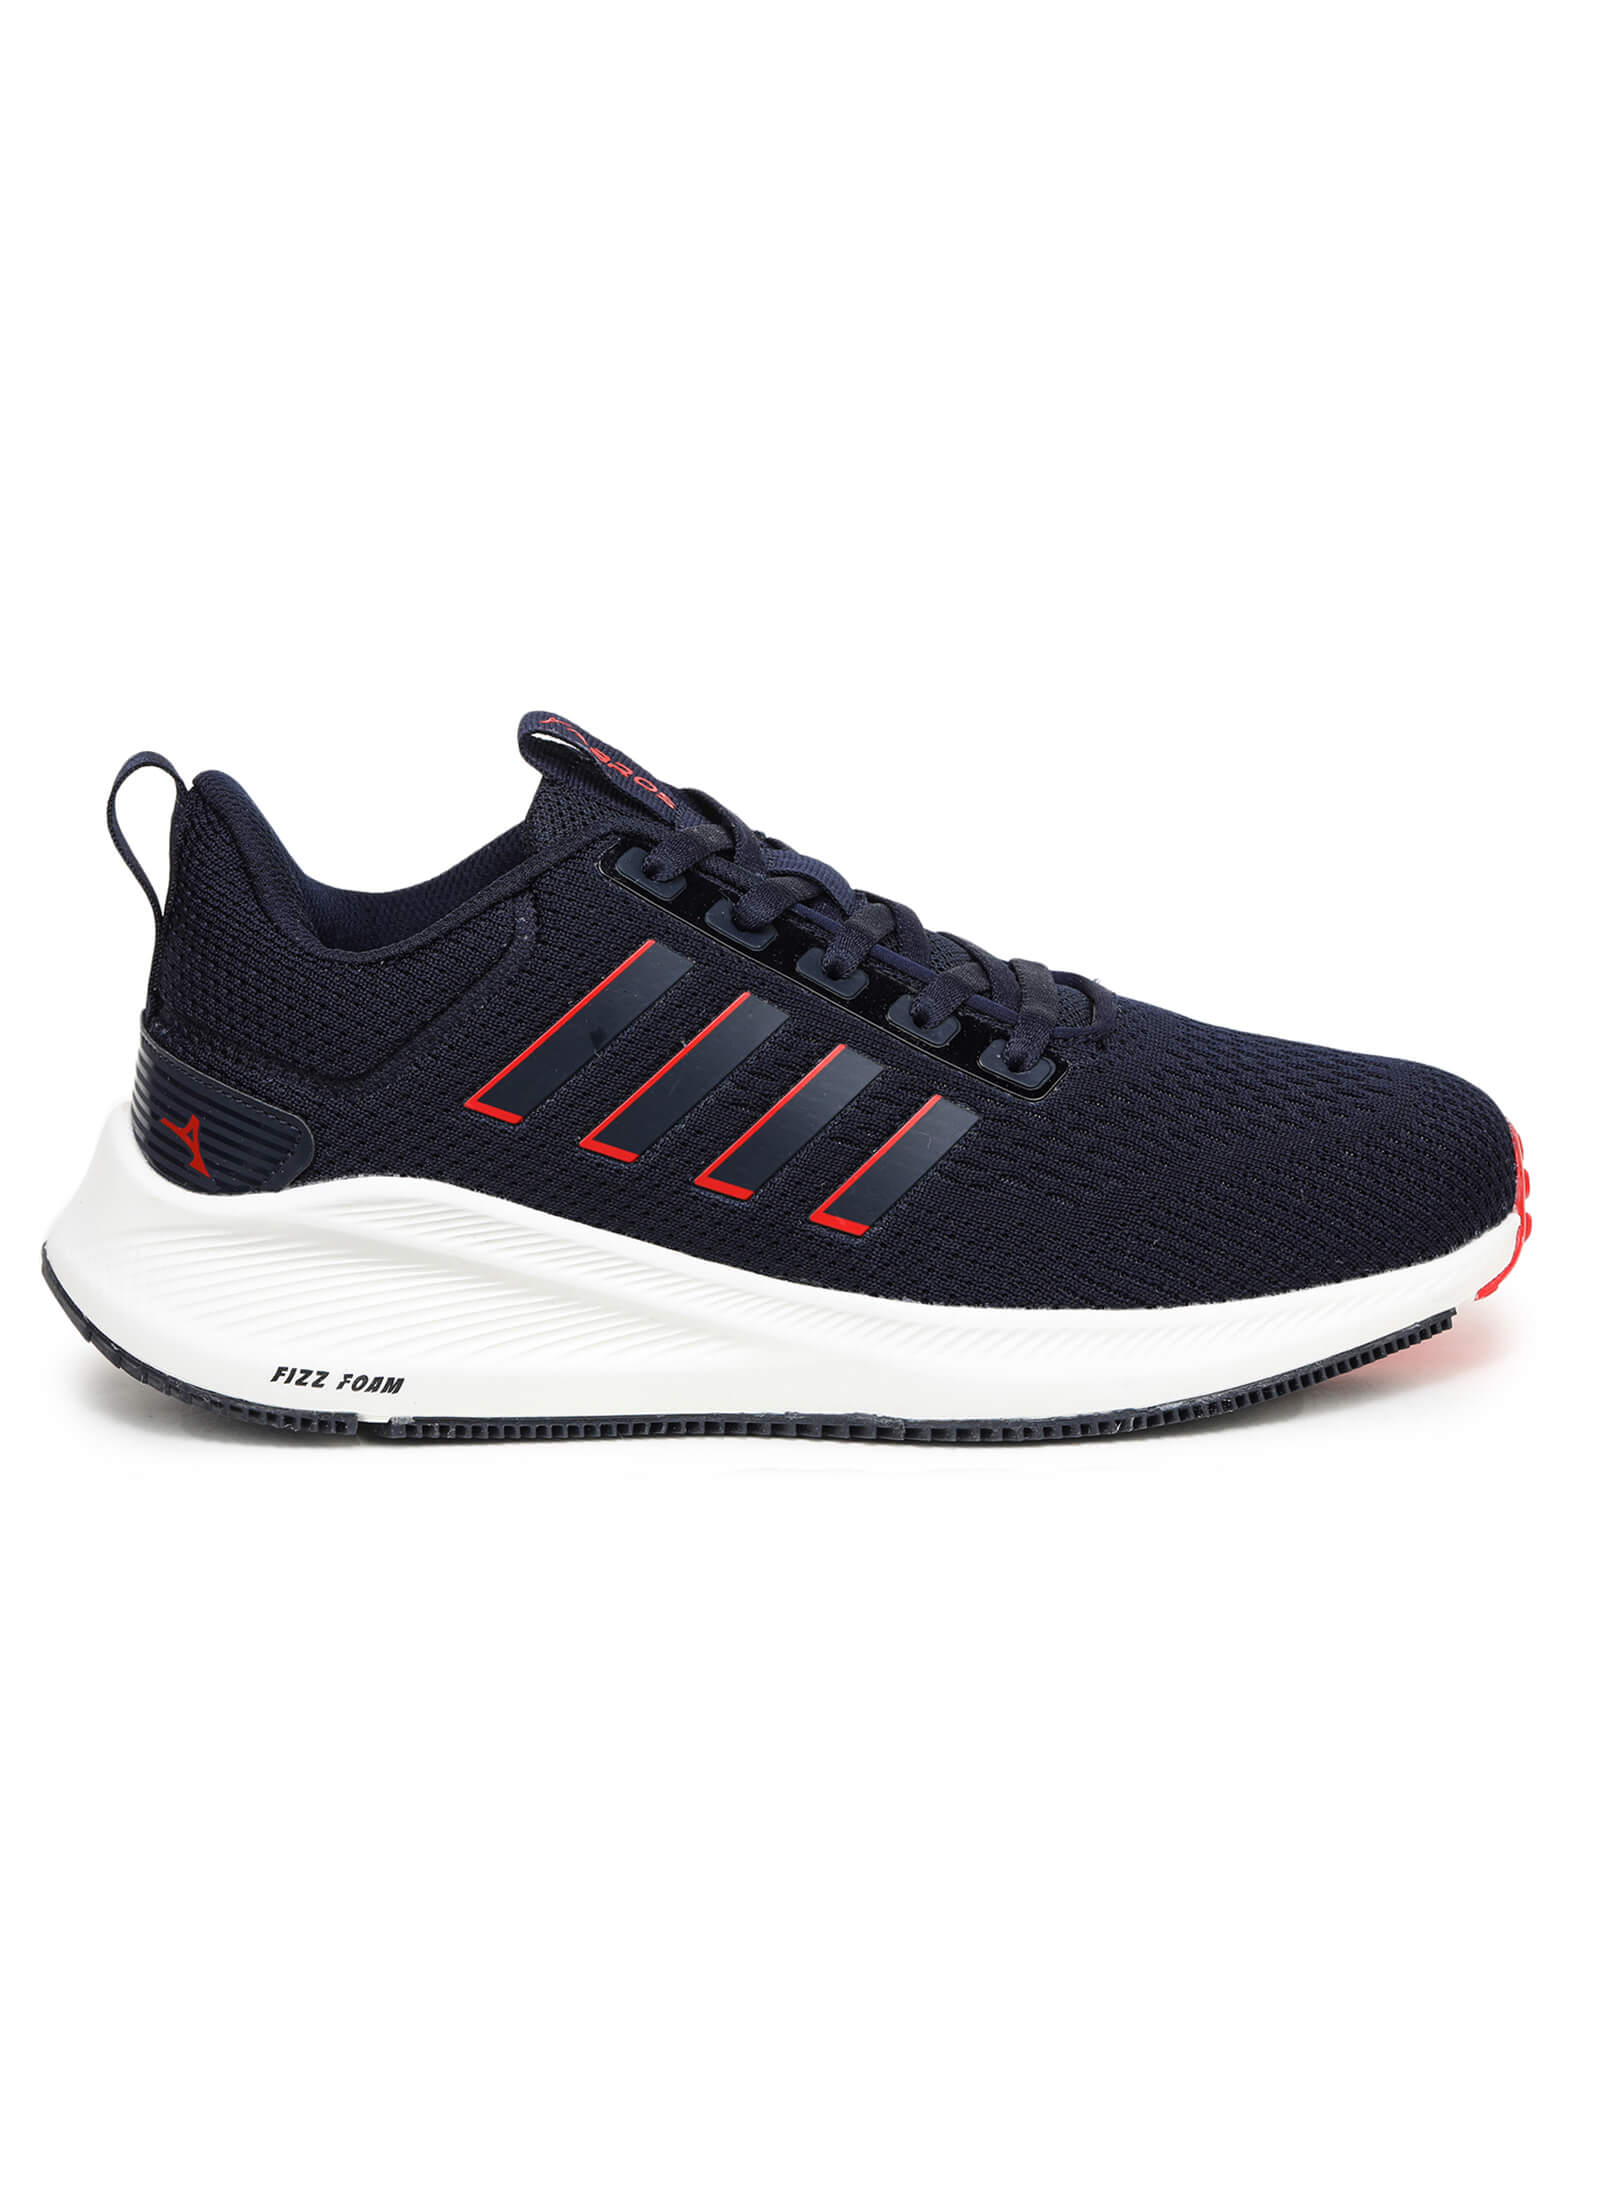 Racer Lightweight Anti-Skid Sports Shoes for Men